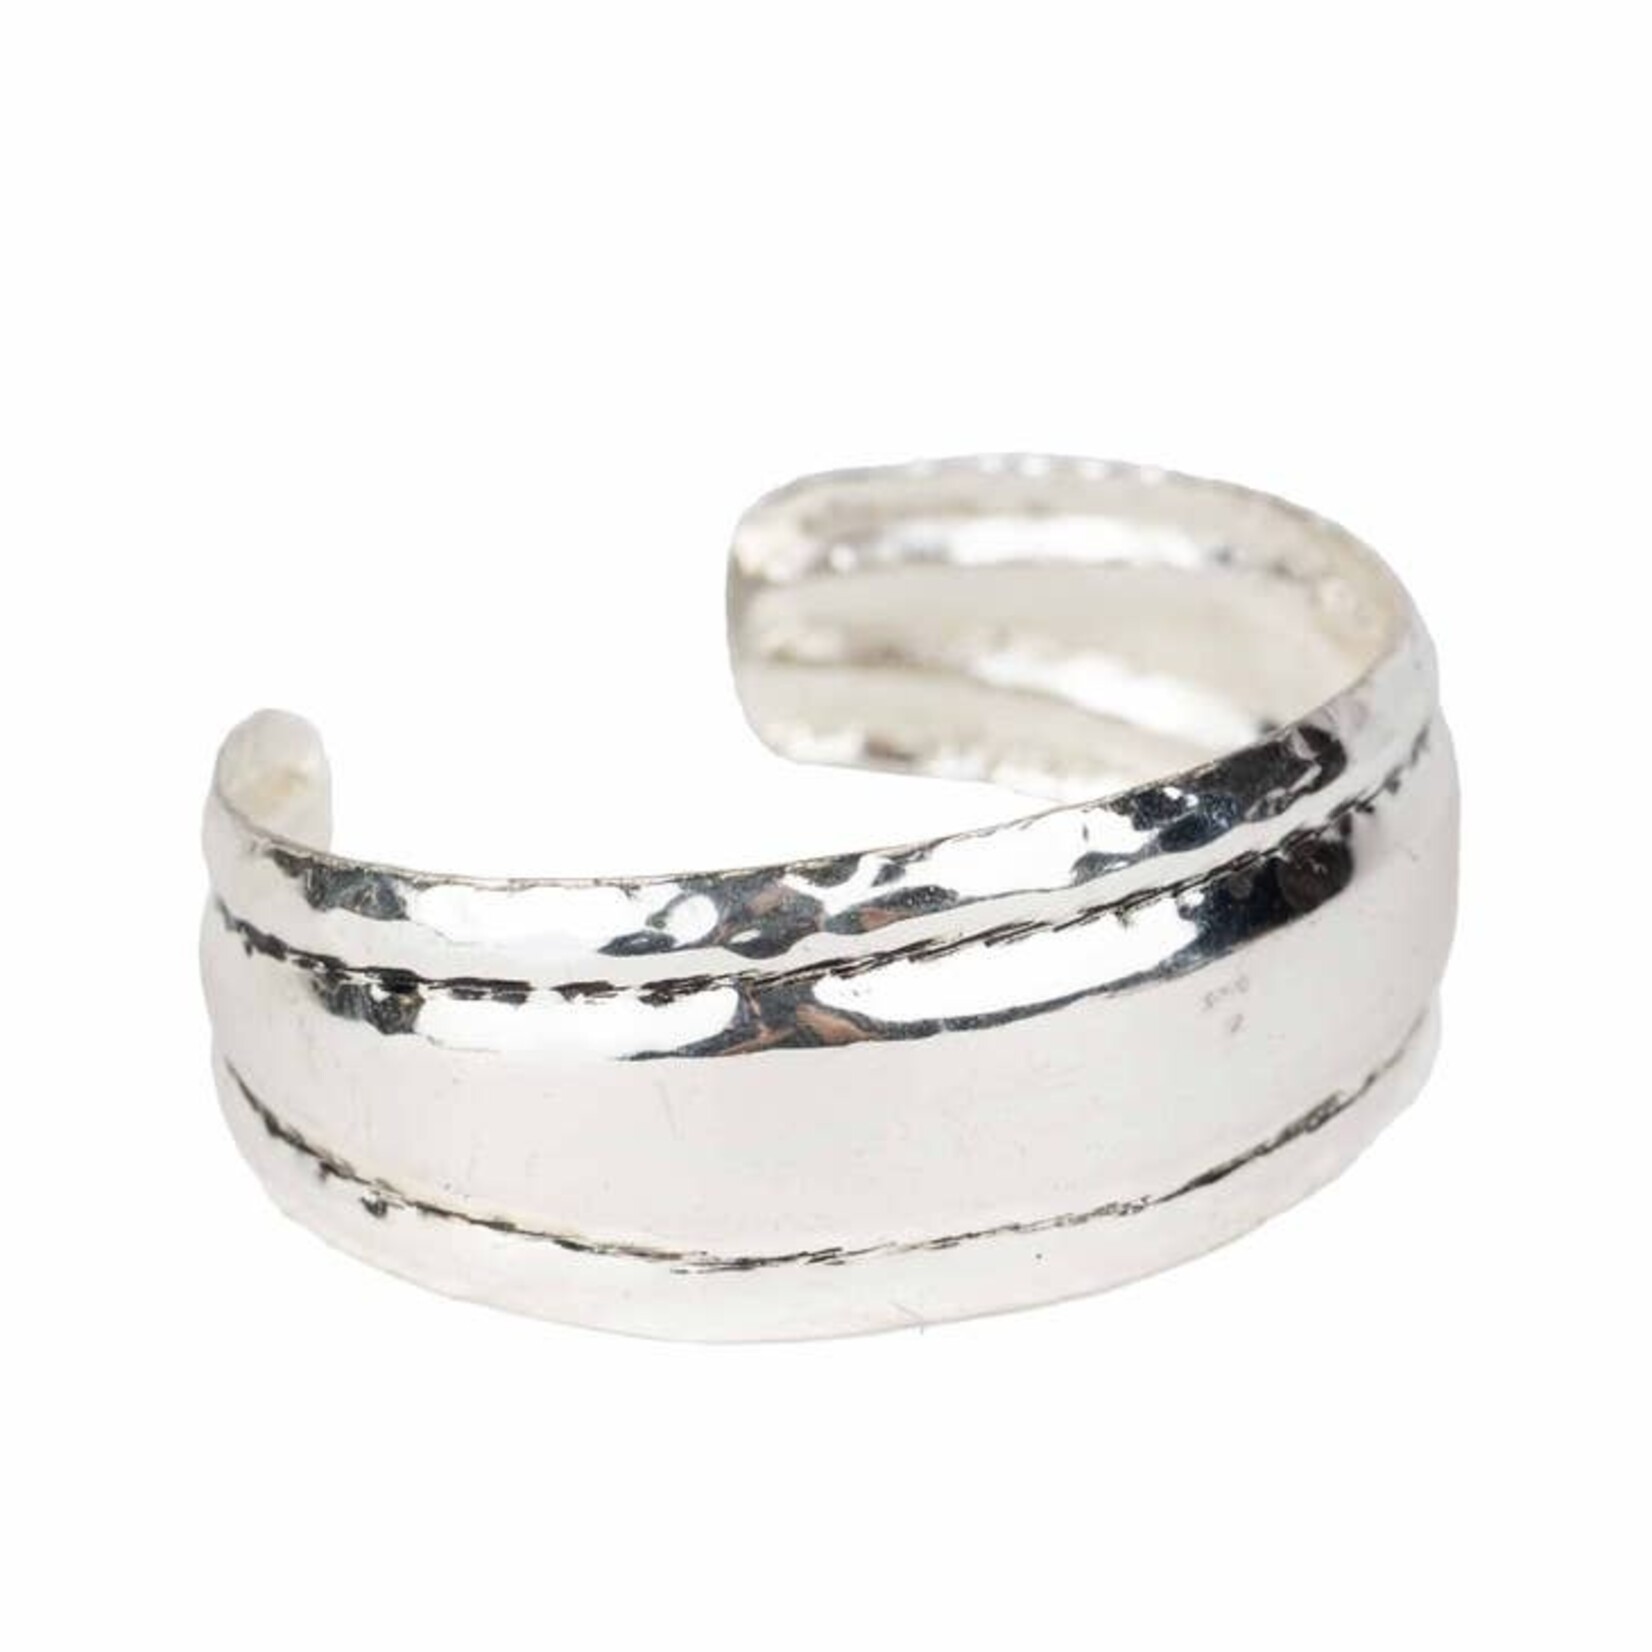 Ten Thousand Villages USA Edgy Cuff Silver Bracelet, India